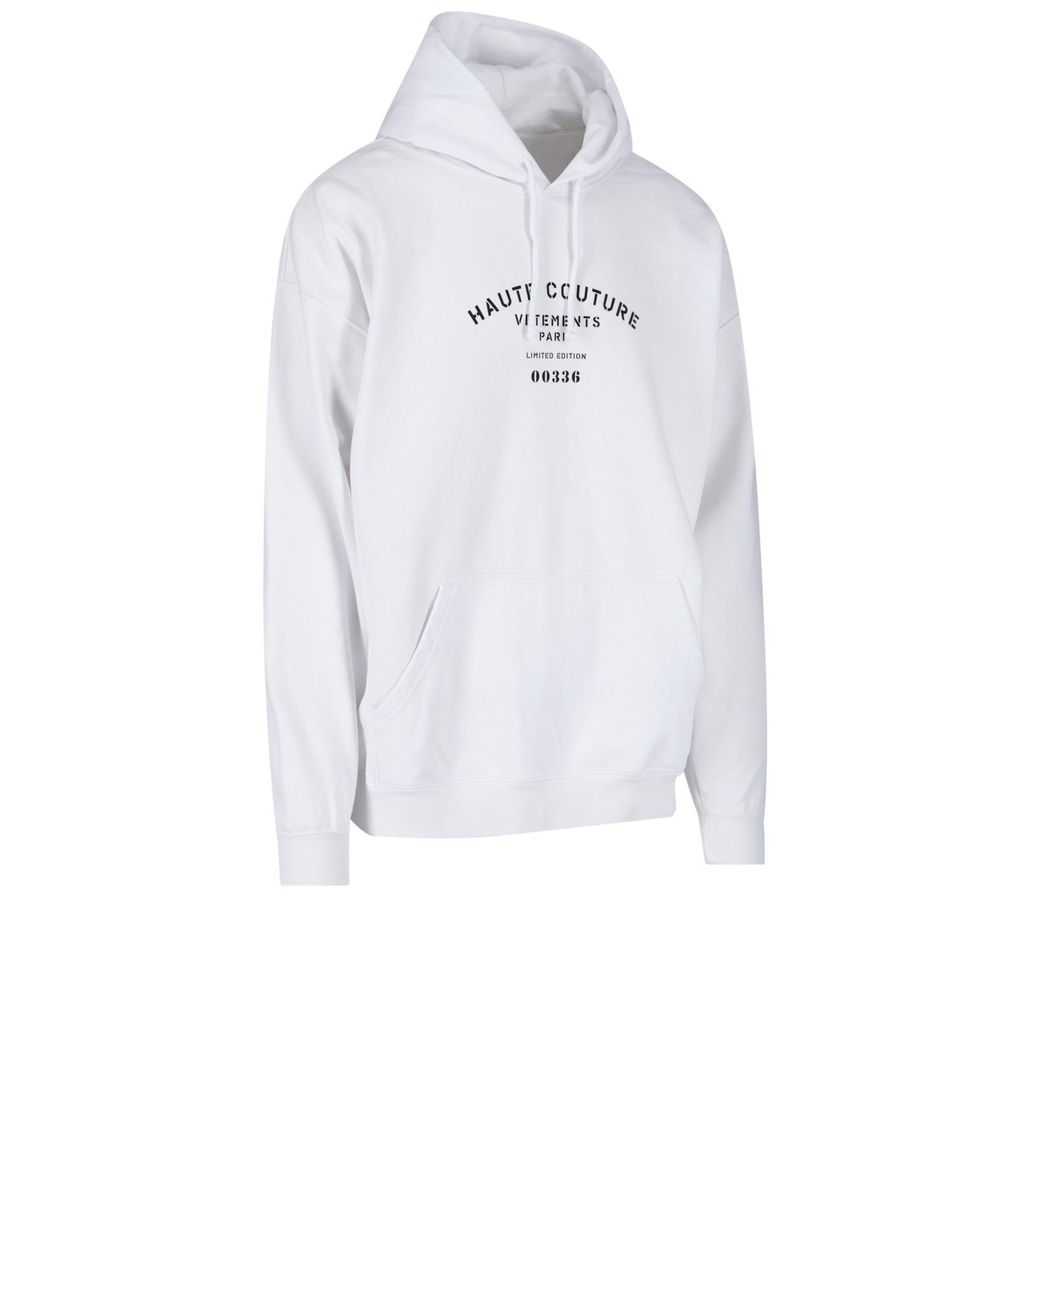 Vetements 'haute Couture' Hoodie in White | Lyst